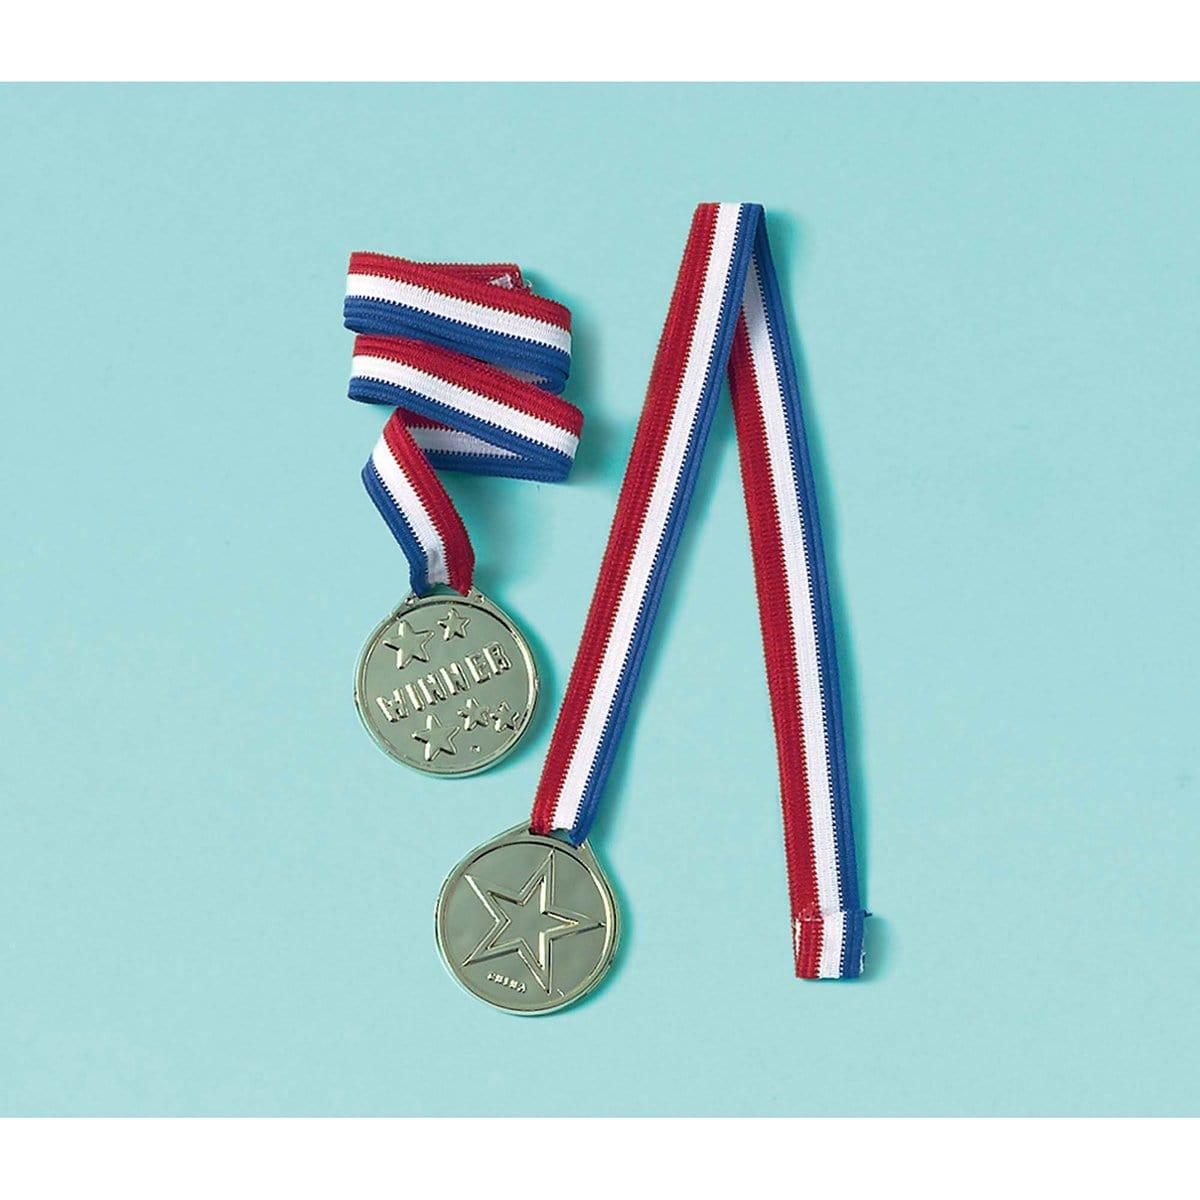 Buy Kids Birthday Award medals, 8 per package sold at Party Expert